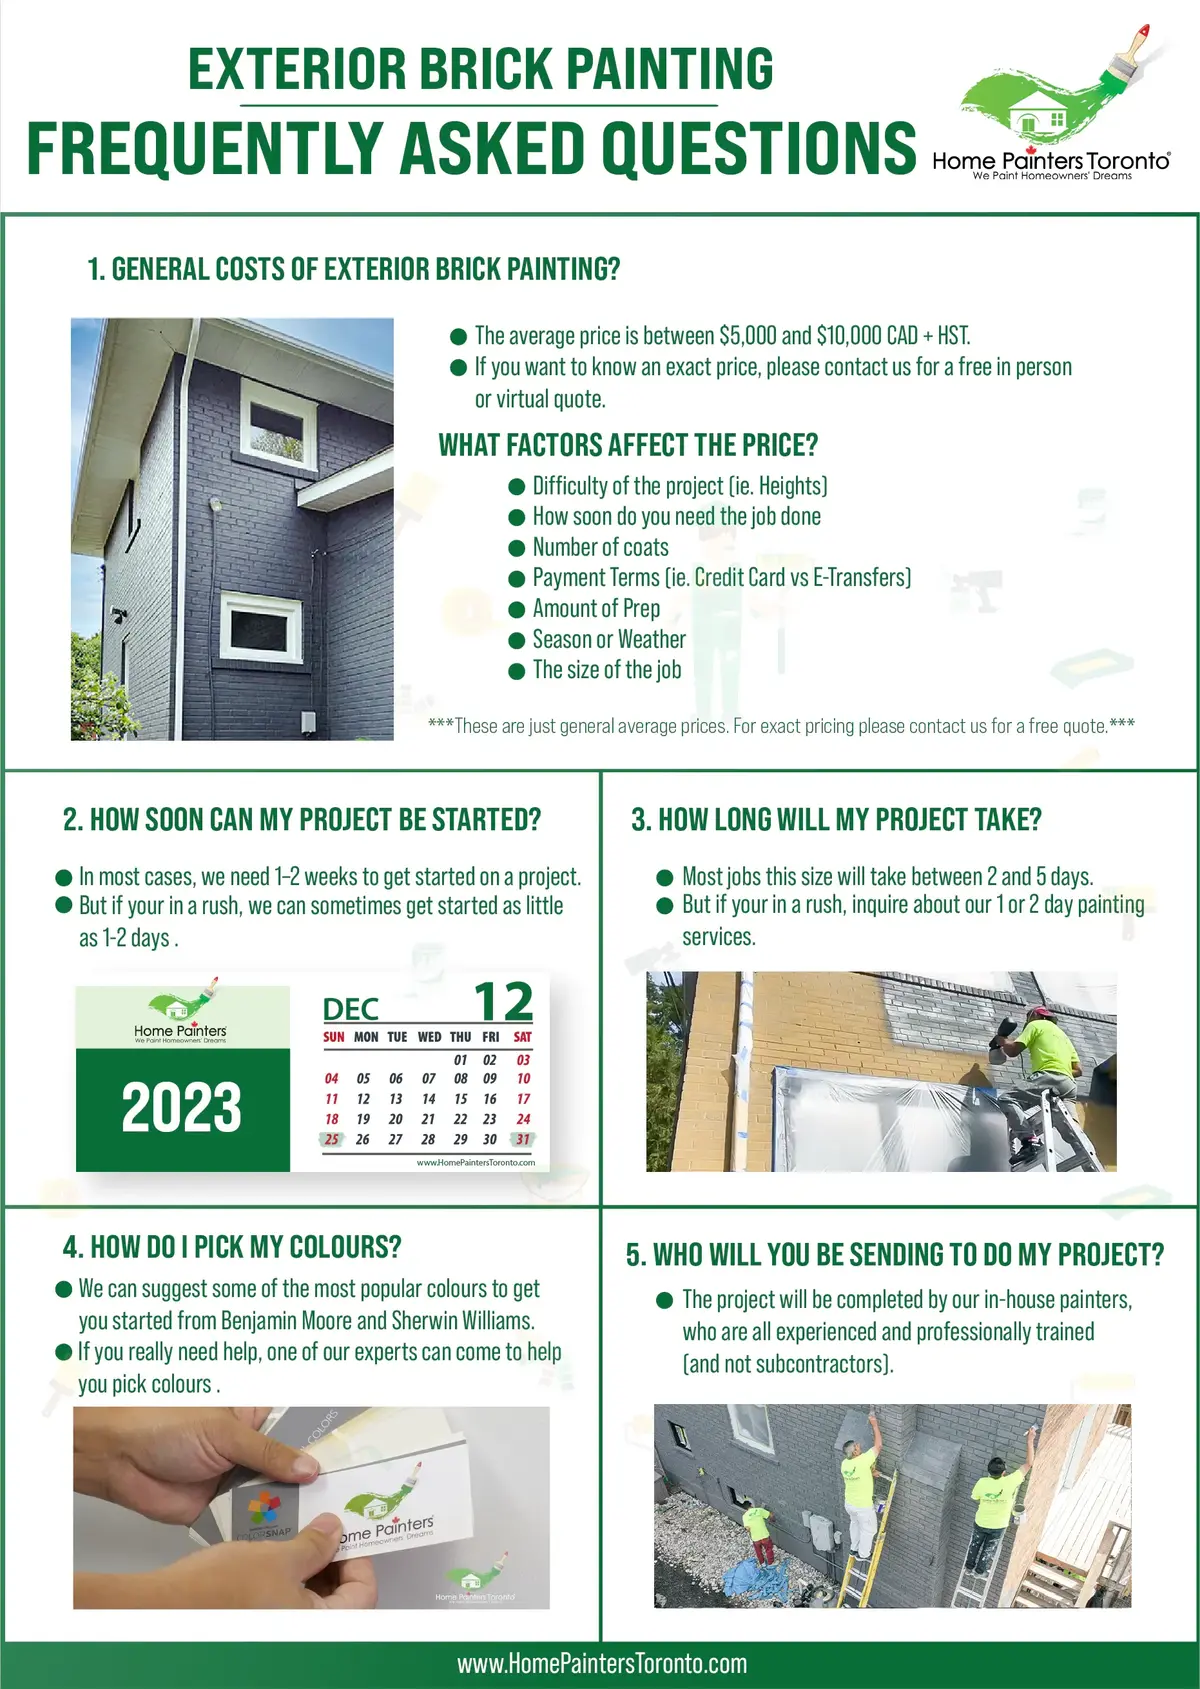 Infographic of frequently asked questions about exterior brick painting